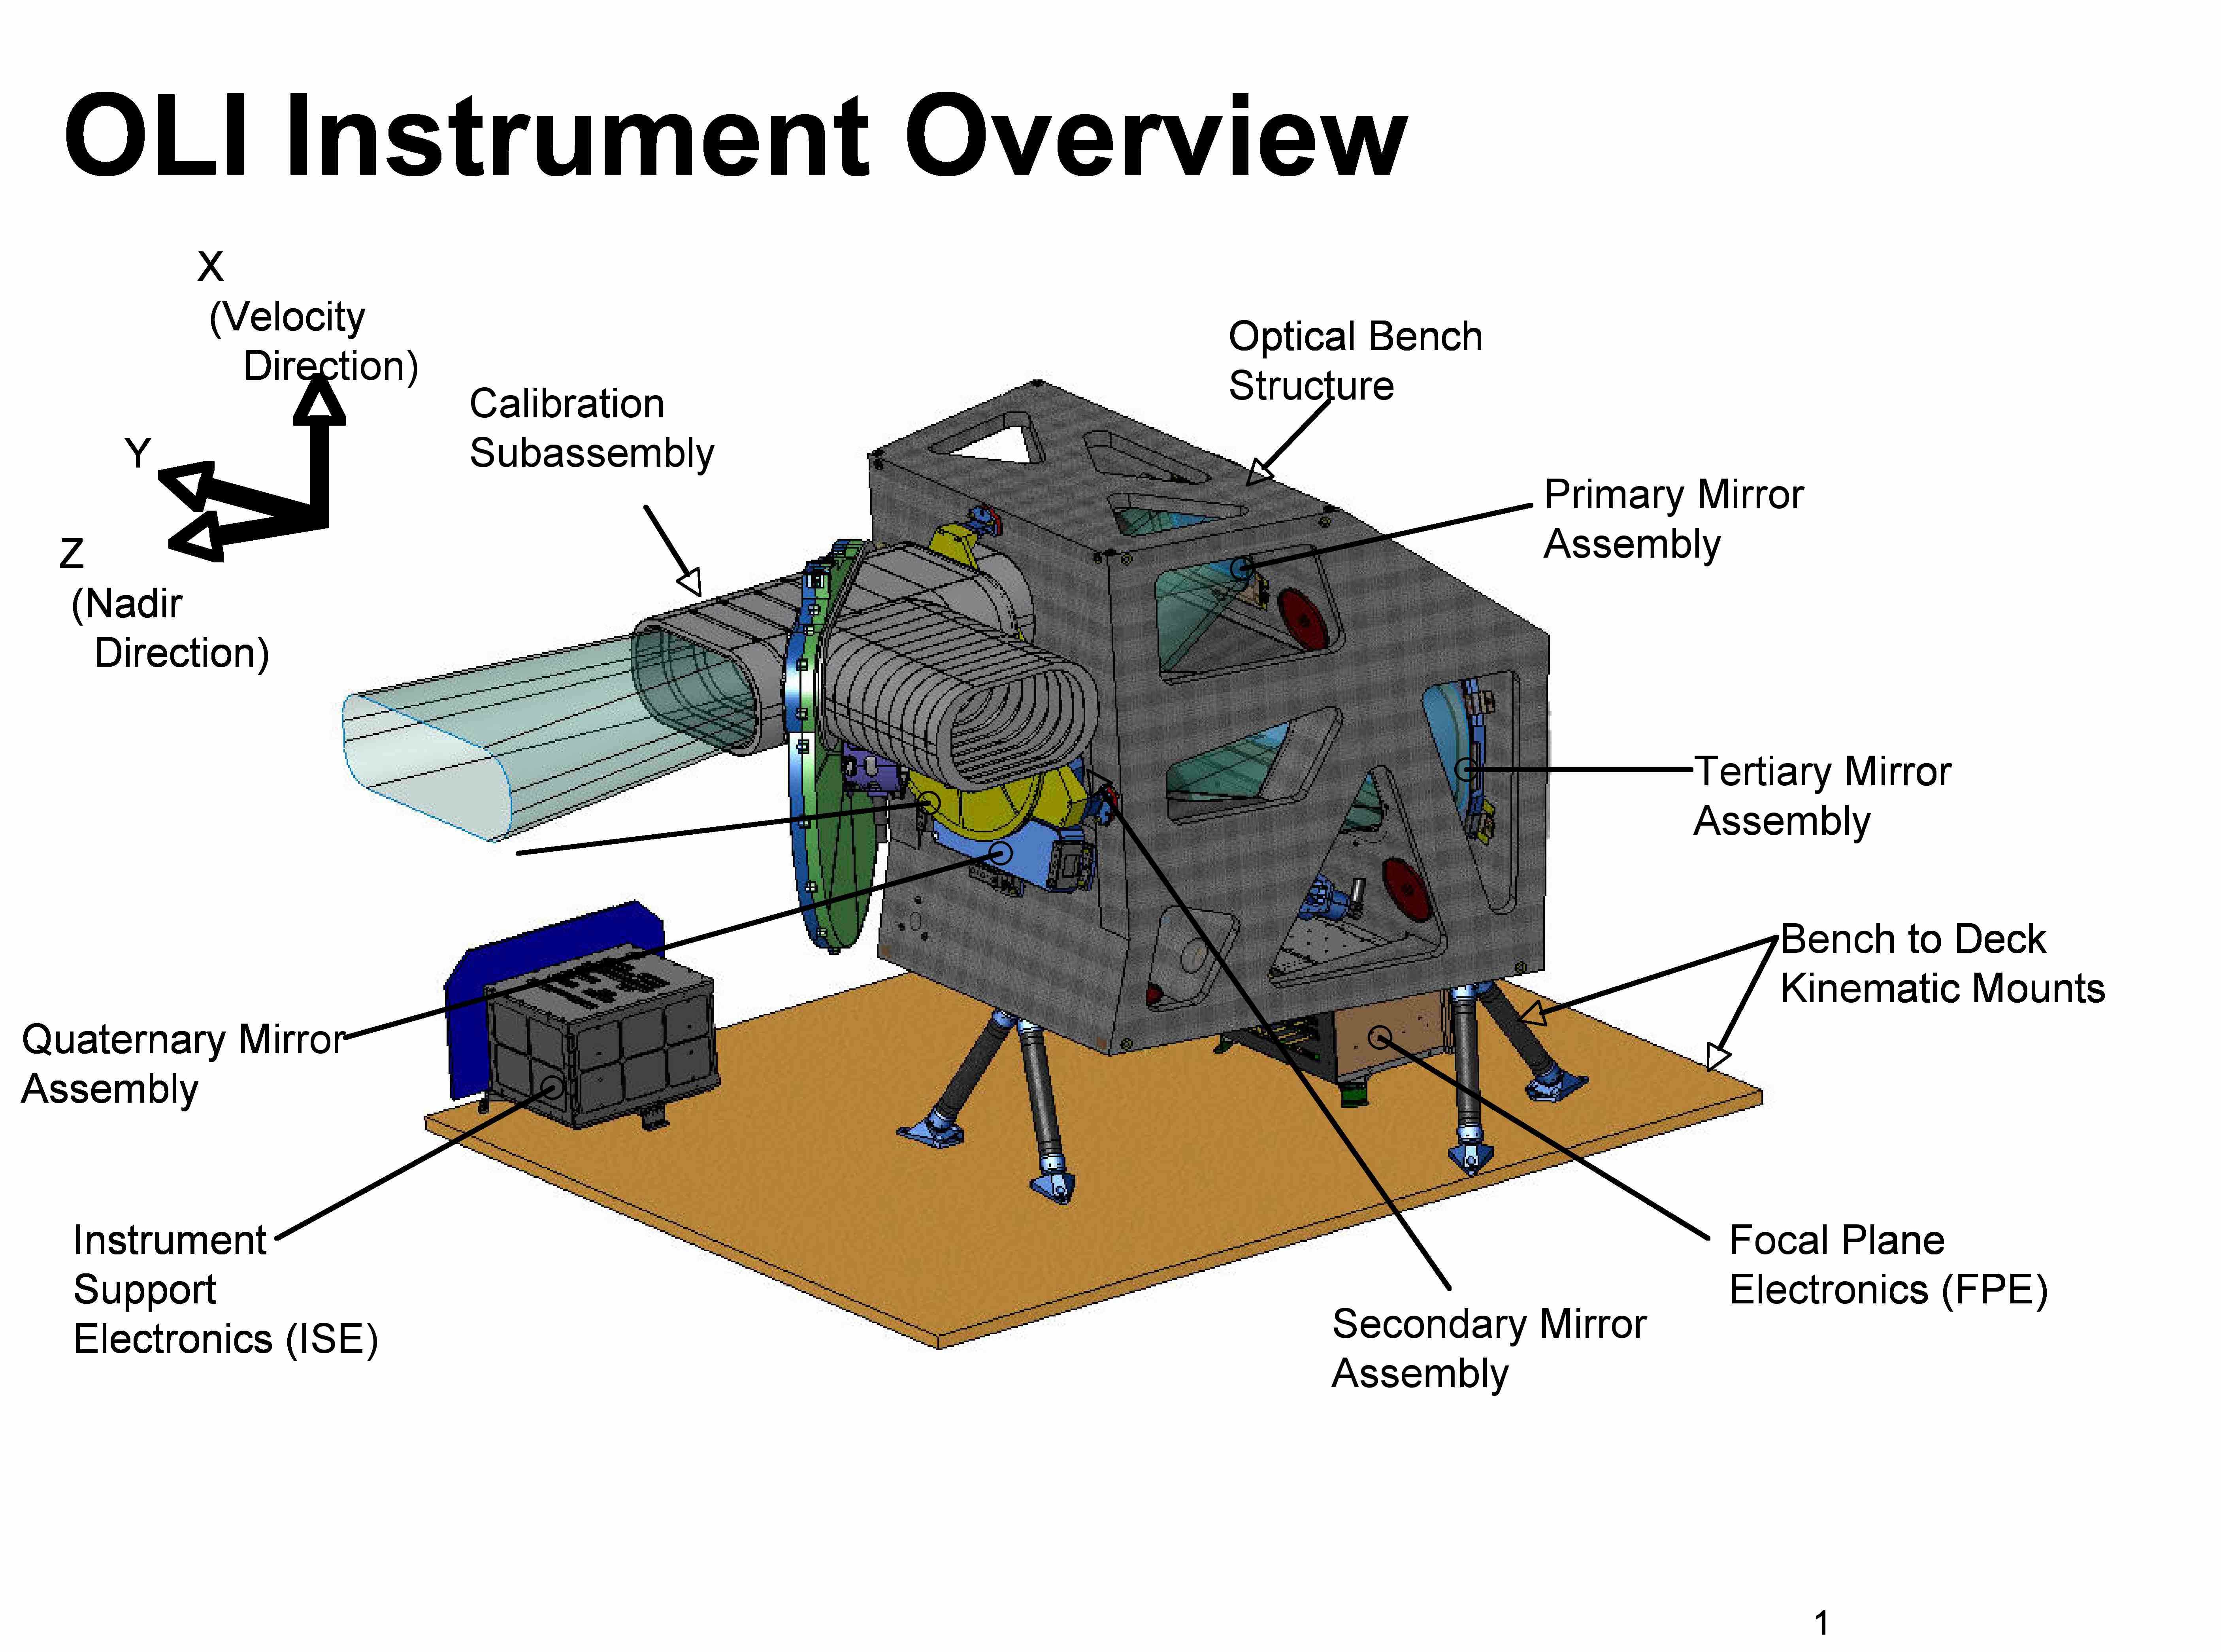 Figure 4. Operational Land Imager (OLI) planned for the Landsat Data Continuity Mission.